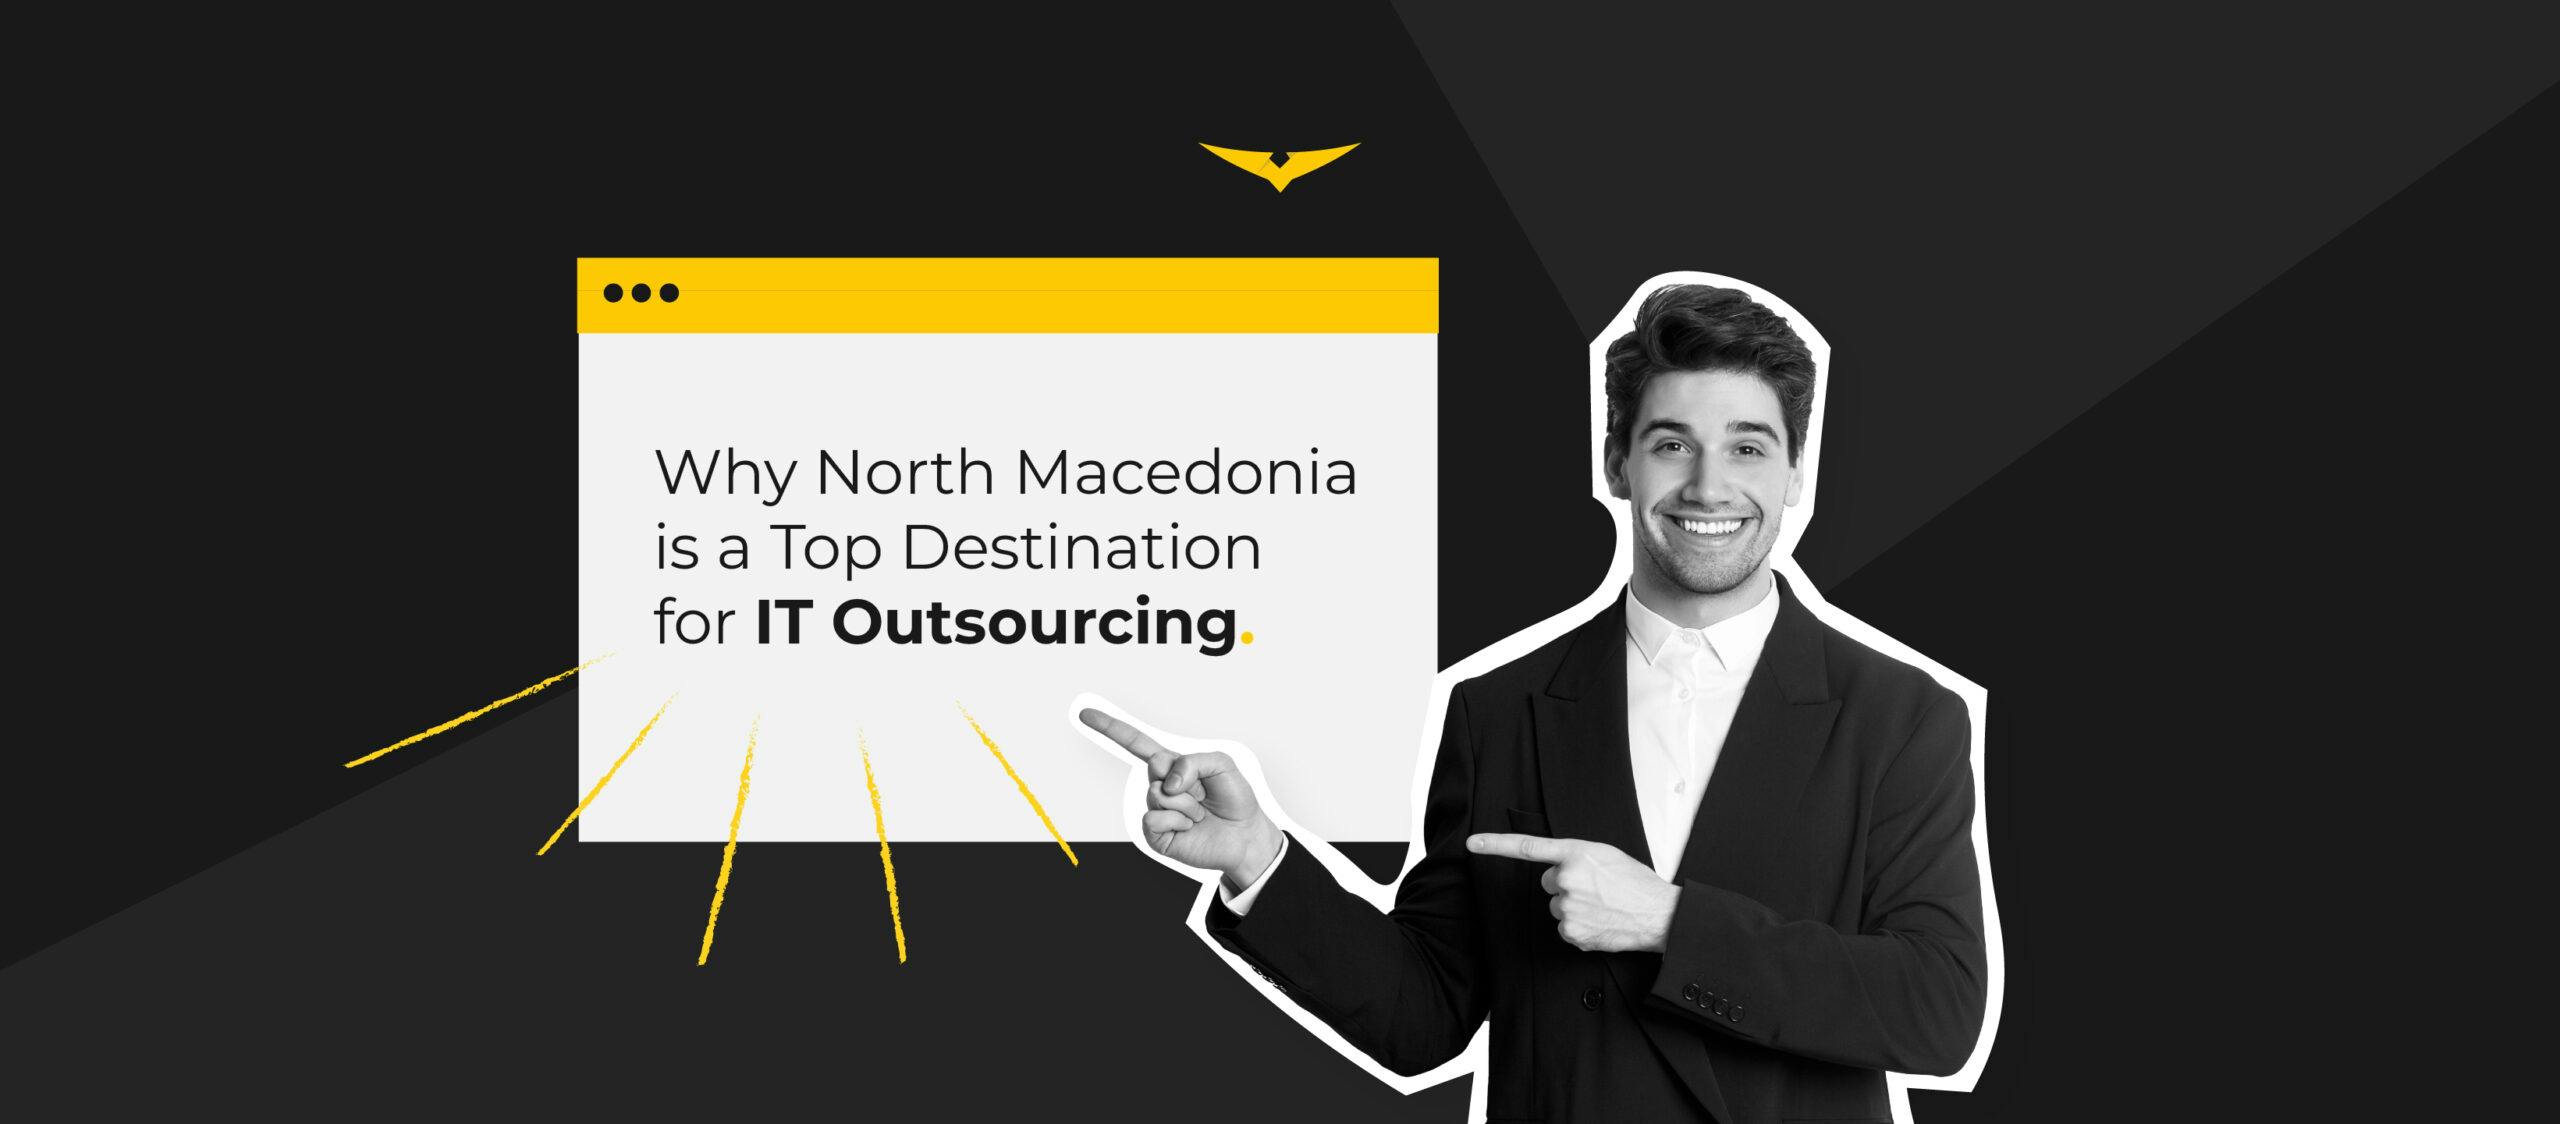 Why North Macedonia is a Top Destination for IT Outsourcing?